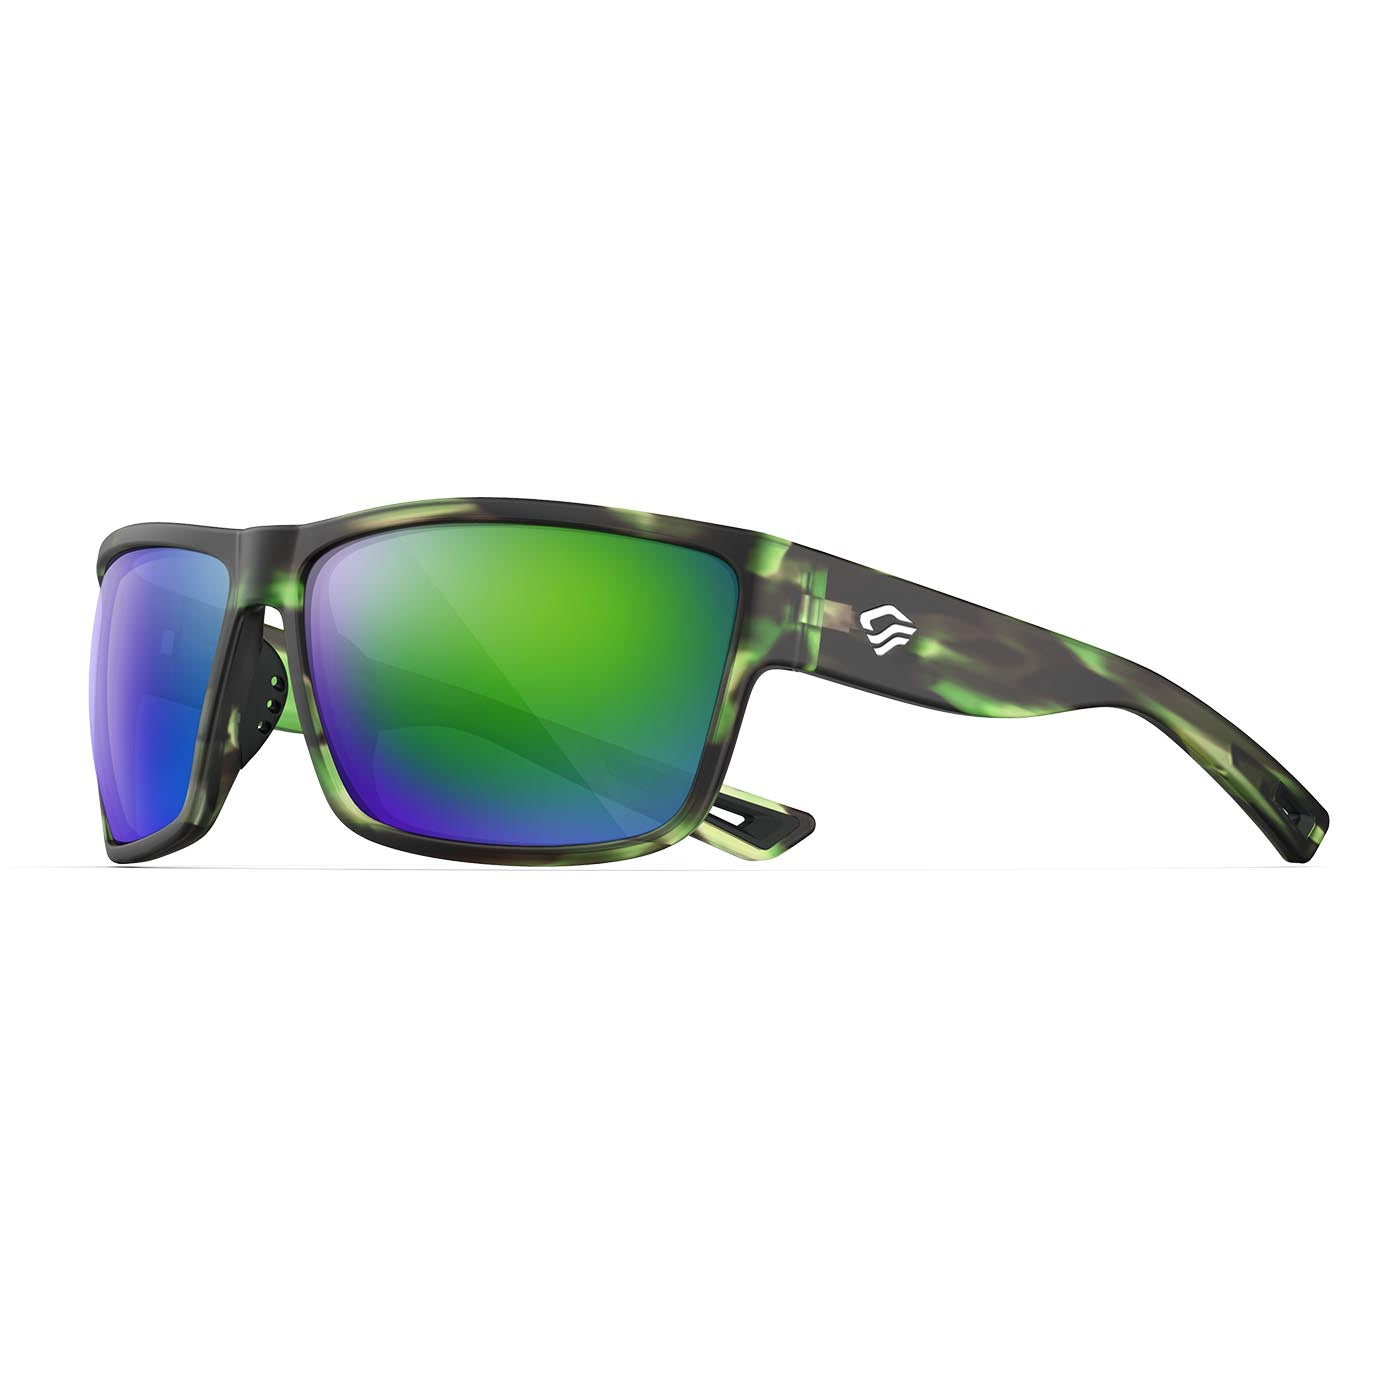 Pure Polarized Sports Sunglasses with Lifetime Warranty - Adjustable and  Flexible Frame - Ideal for Men and Women - Ideal for Cycling, Running, Golf,  and Fishing - Matte Grey To Half Transparent